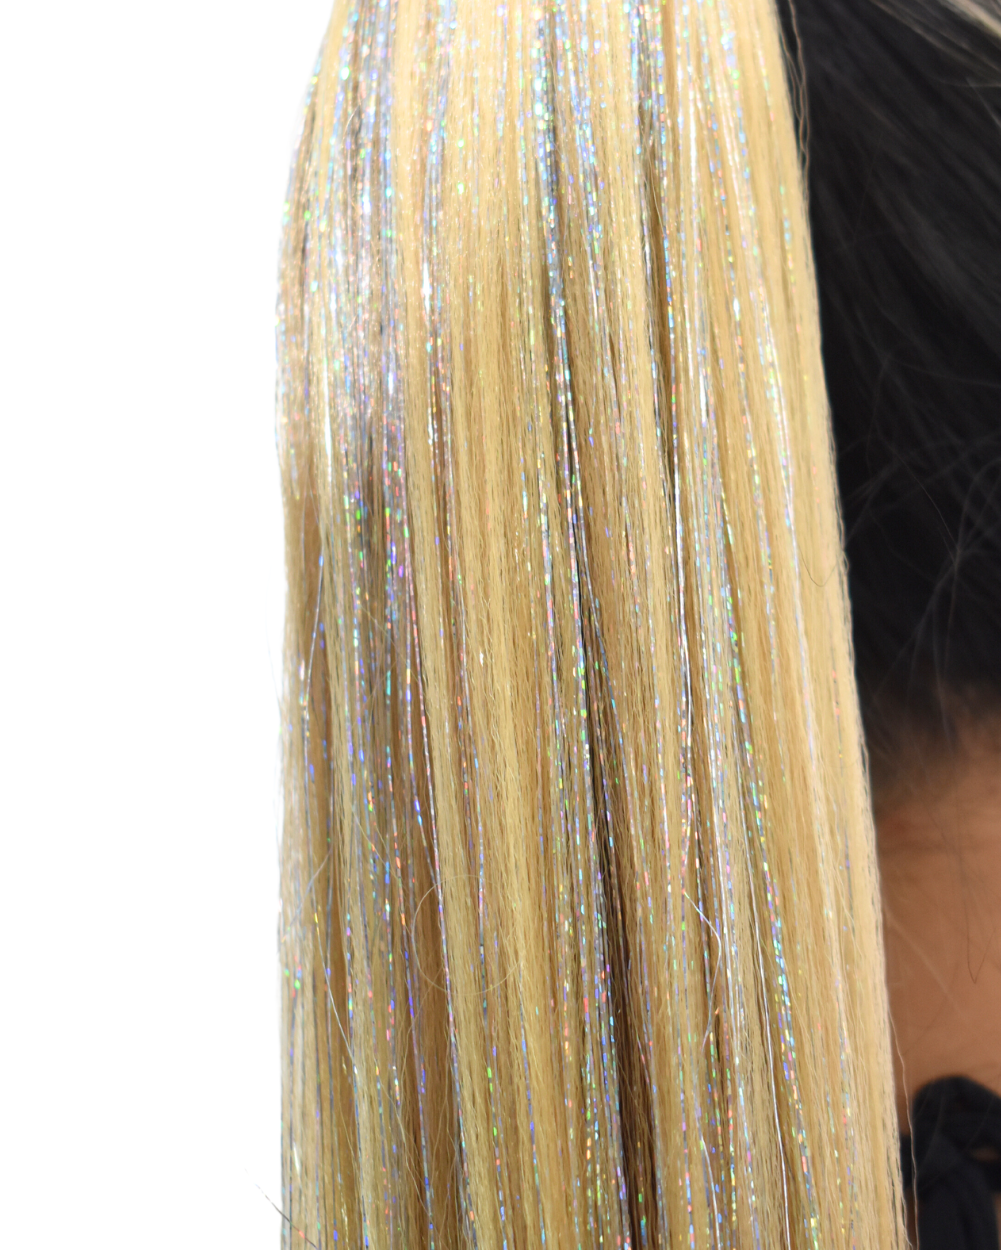 Champagne Sparkle - Light Blonde Braid-In Hair with Silver Tinsel